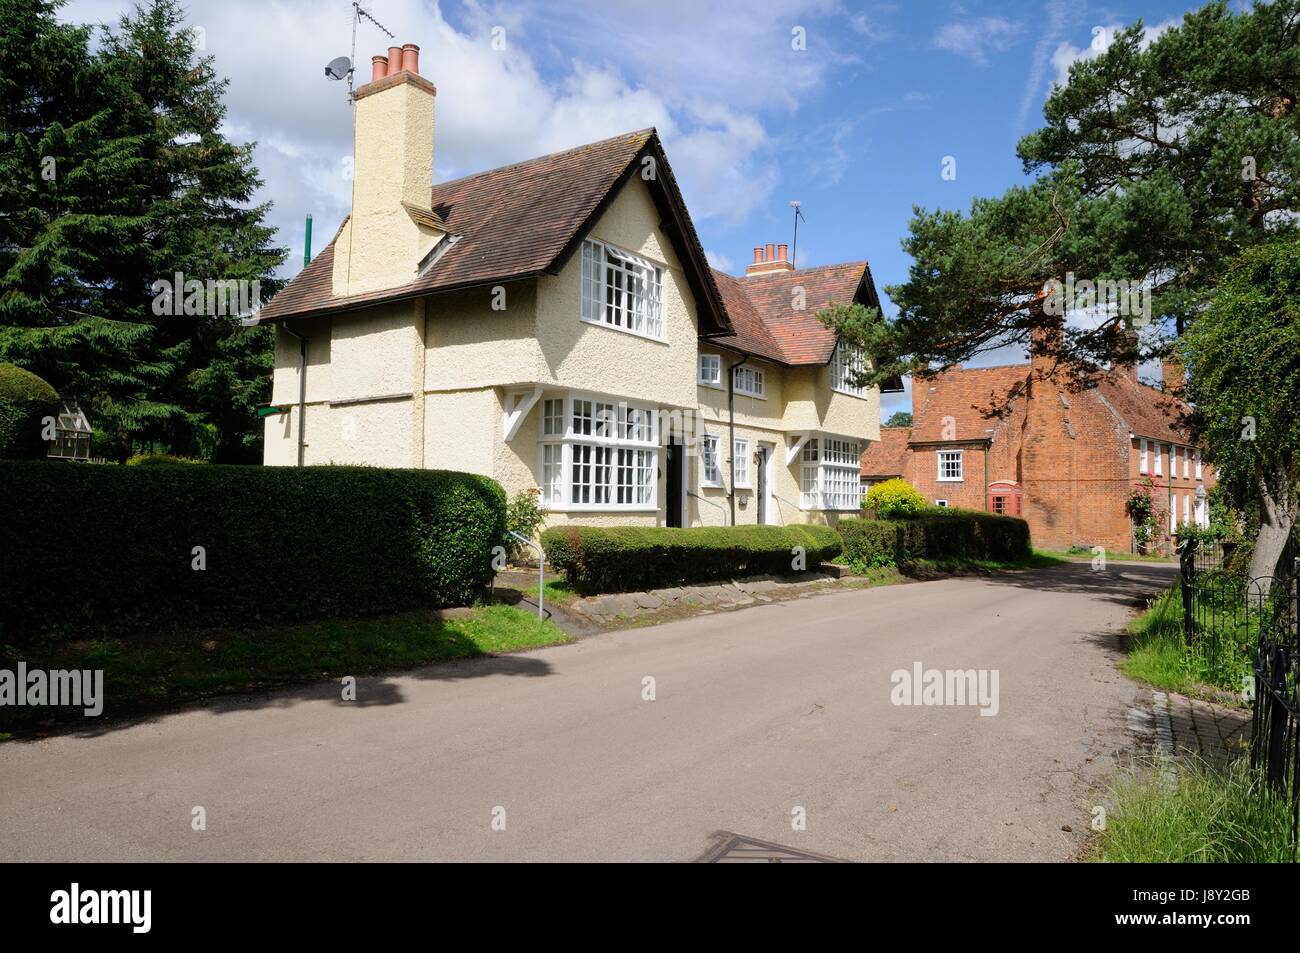 School cottages,Westmill, Hertfordshire Stock Photo